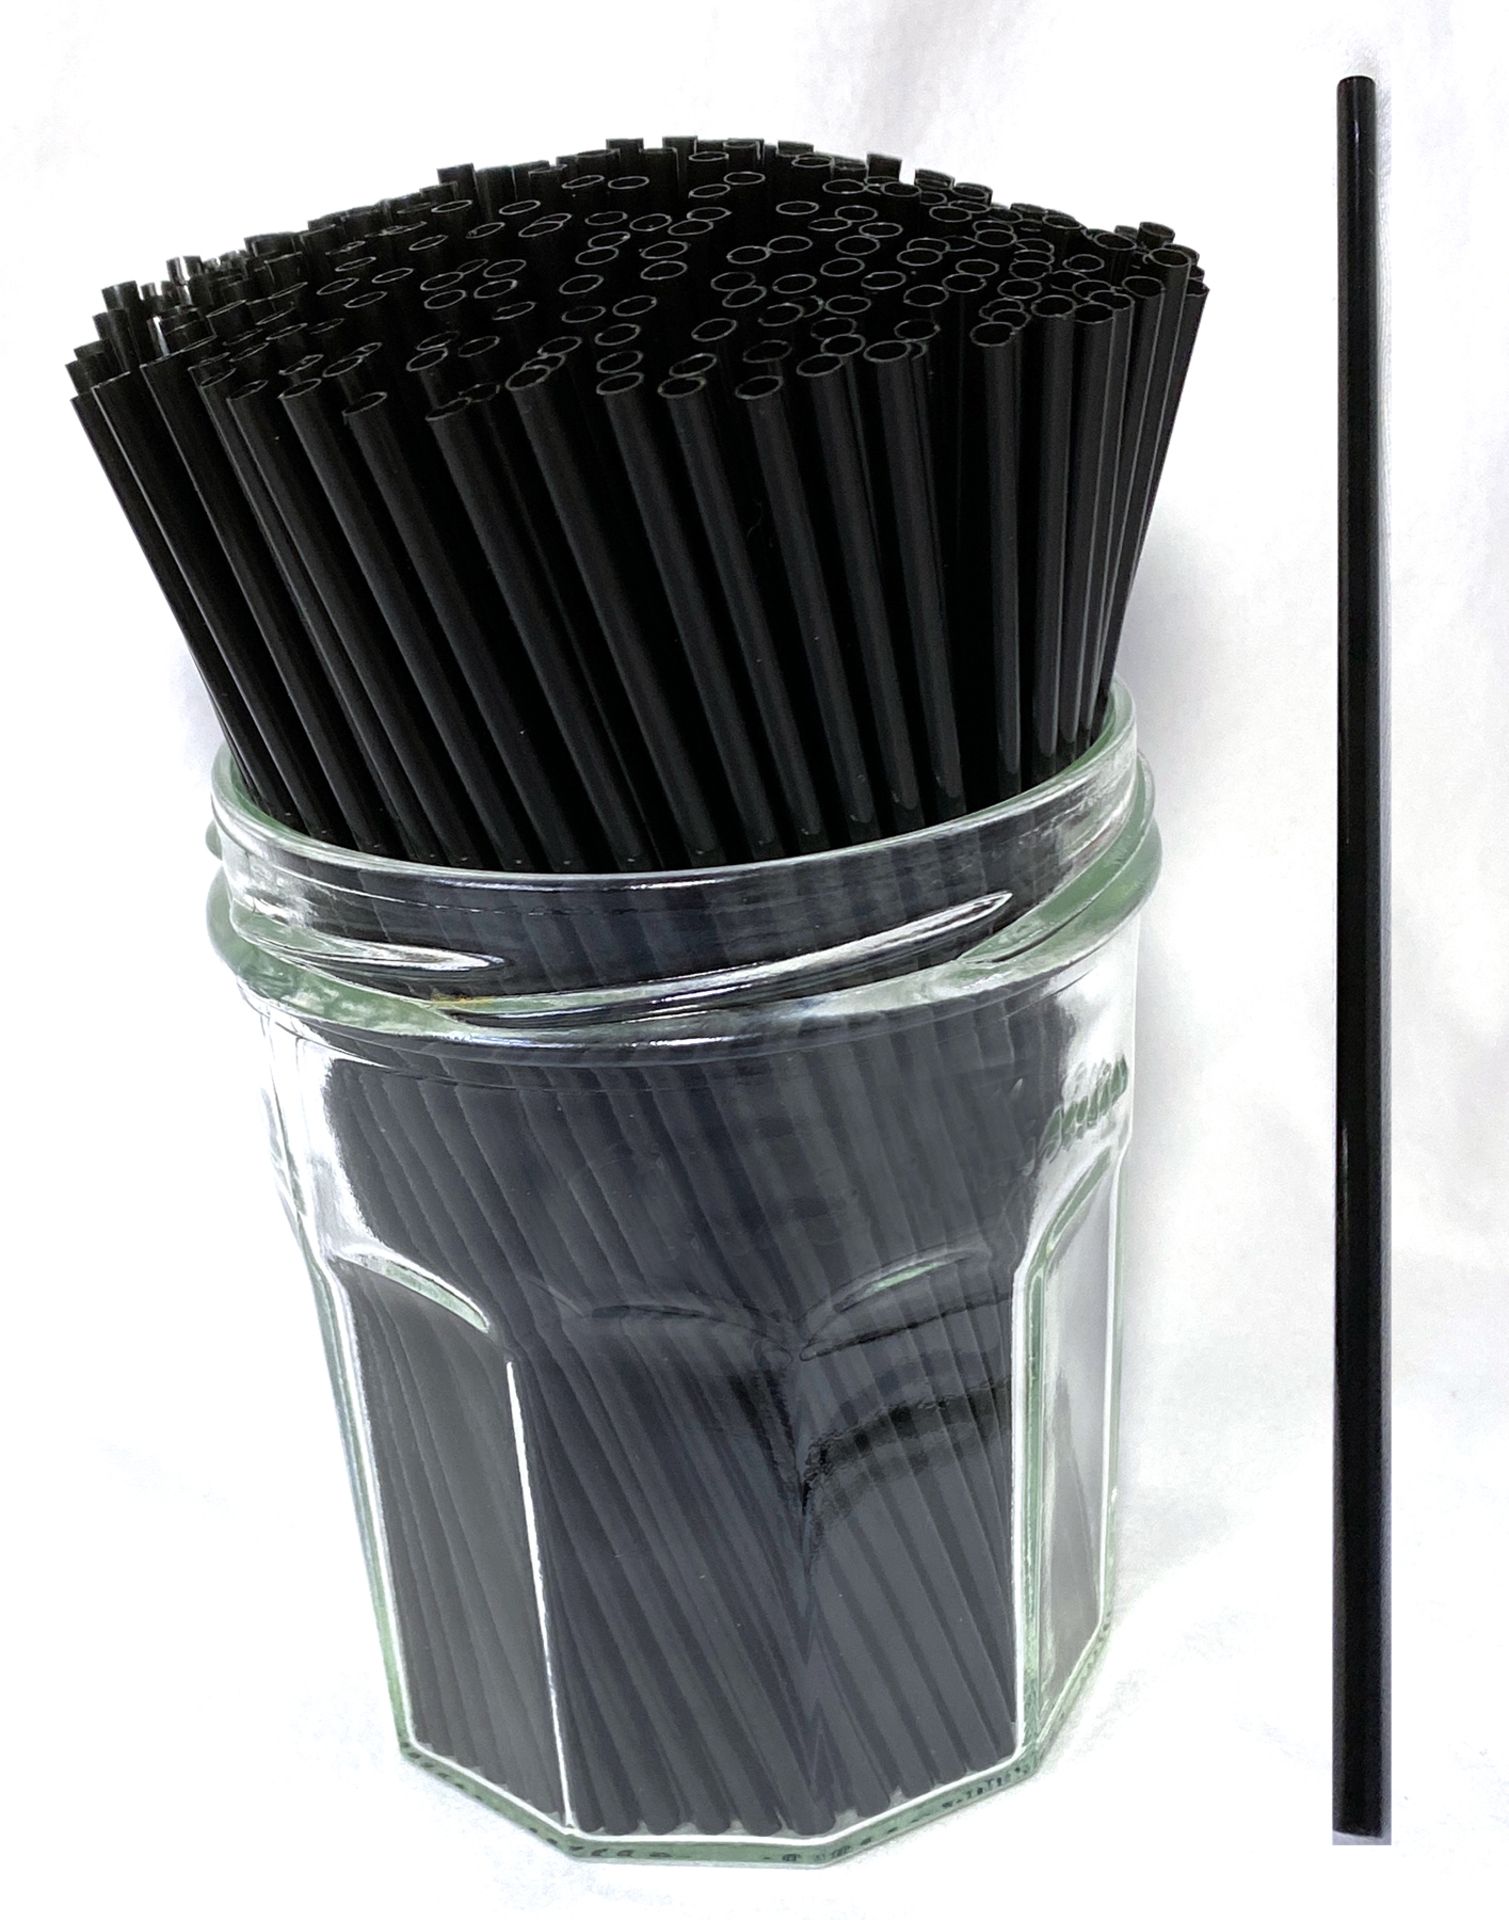 5 x Boxes of Black Sip Straws by 888 Gastro Disposables - Image 2 of 3